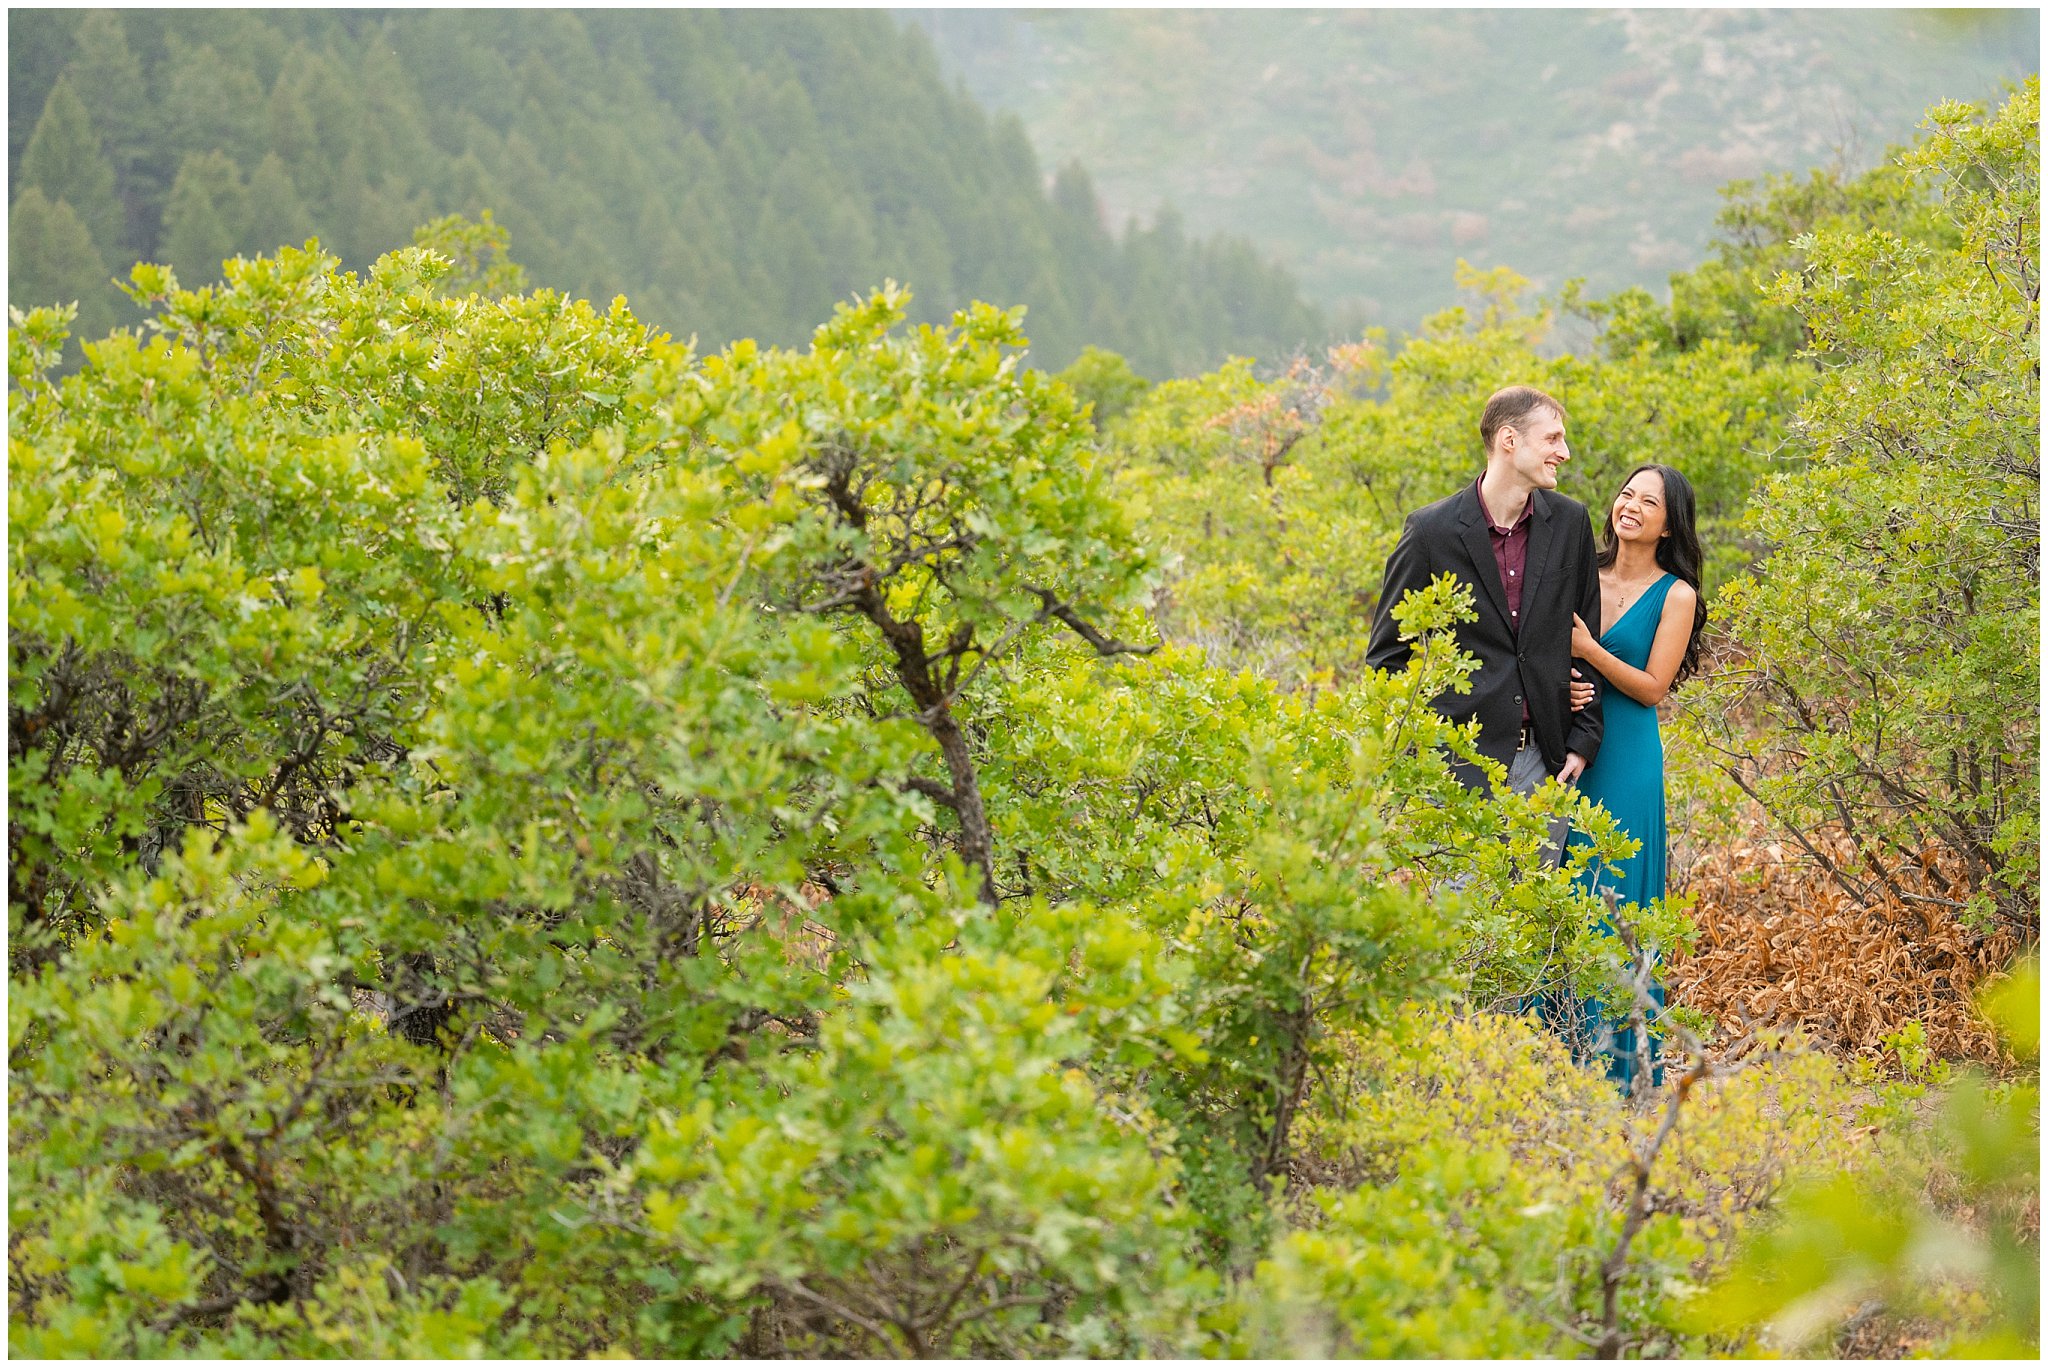 Couple dressed up in formal attire and laughing in the mountains | Summer Utah Mountain Engagement | Jessie and Dallin Photography